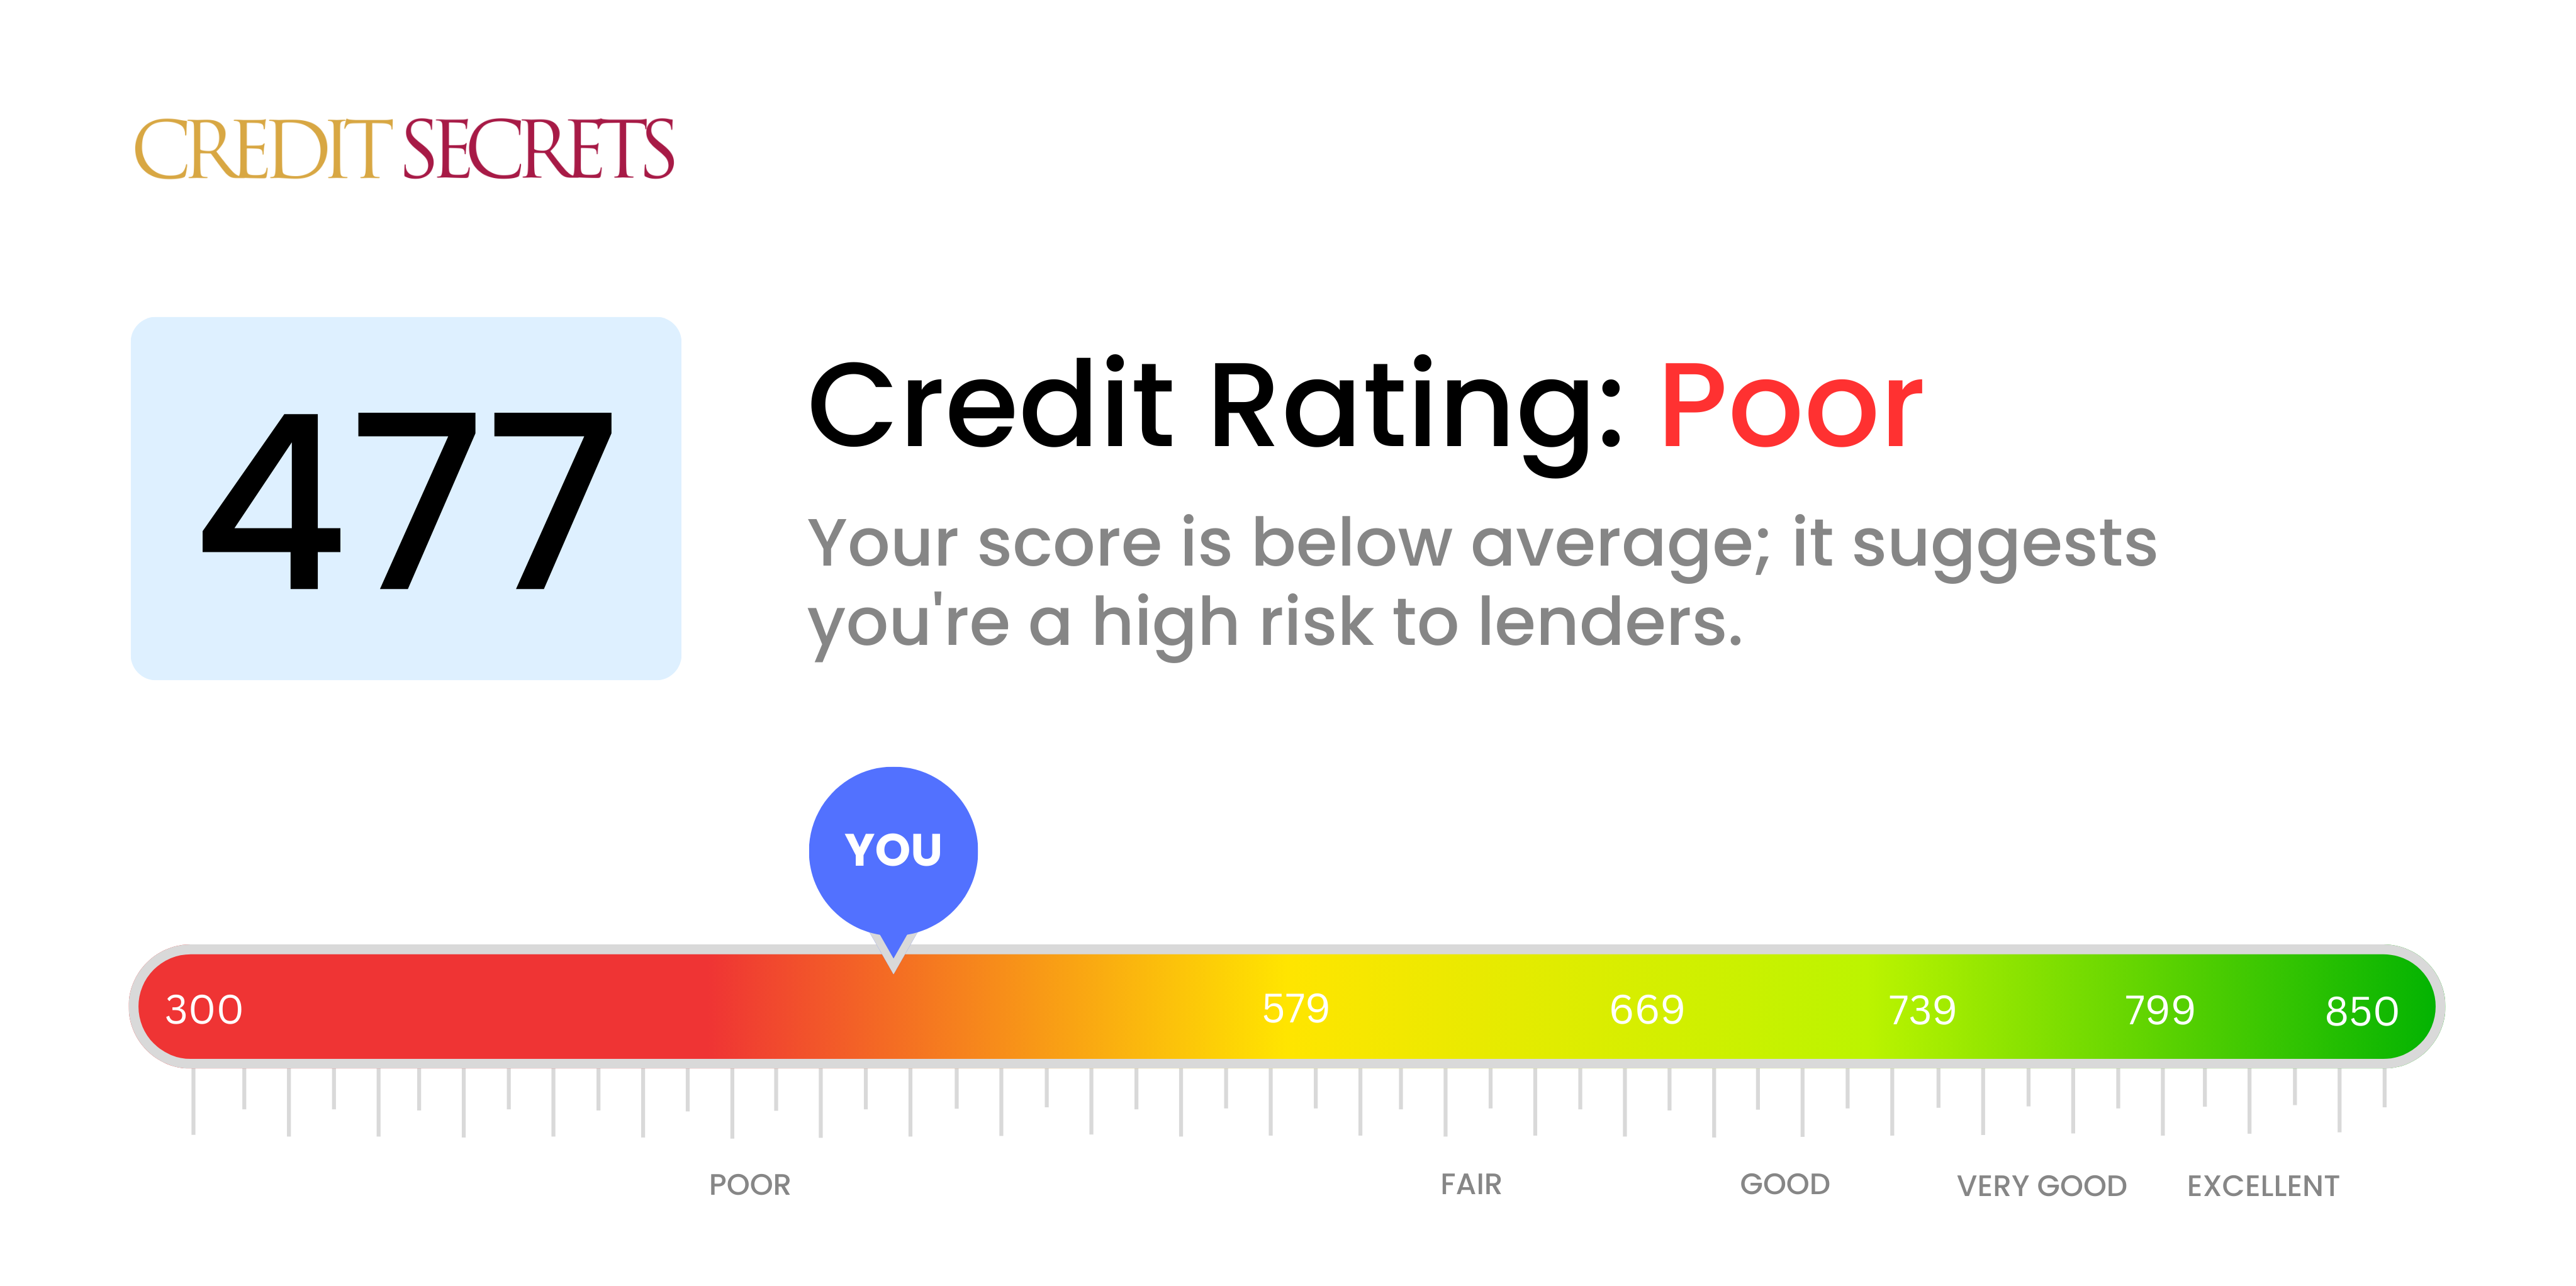 Is 477 a good credit score?